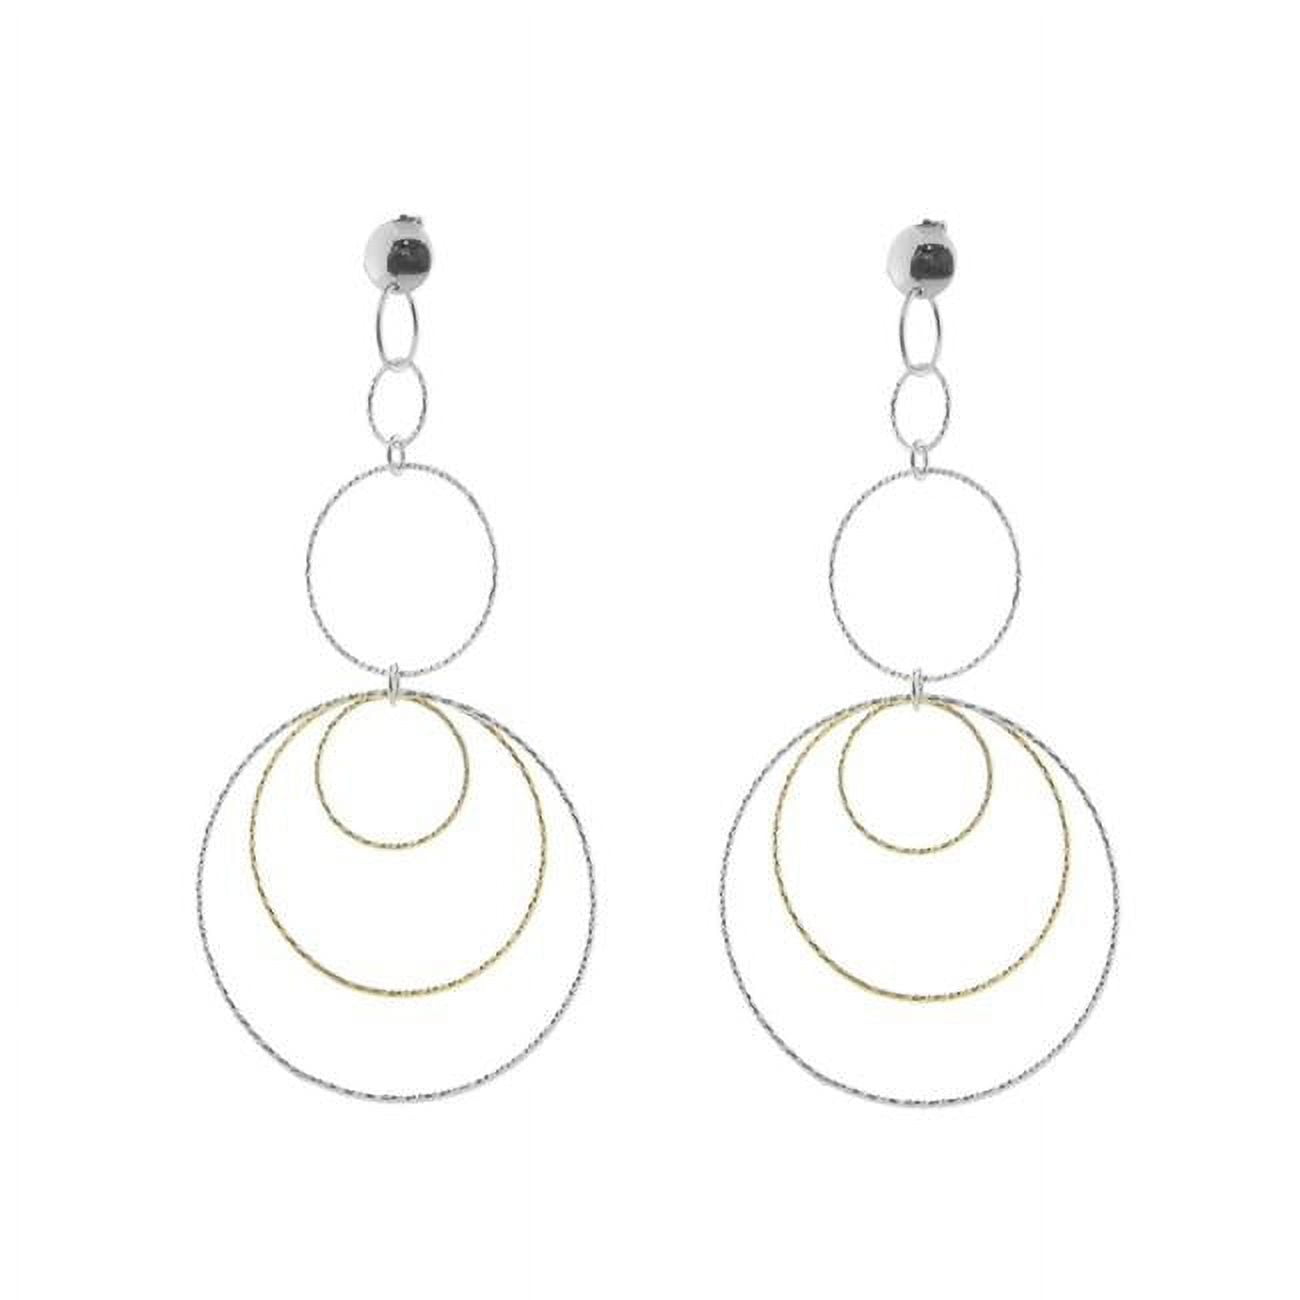 125119g Diamond Cut Concentric Hoop Earrings In Sterling Silver & Gold Plated